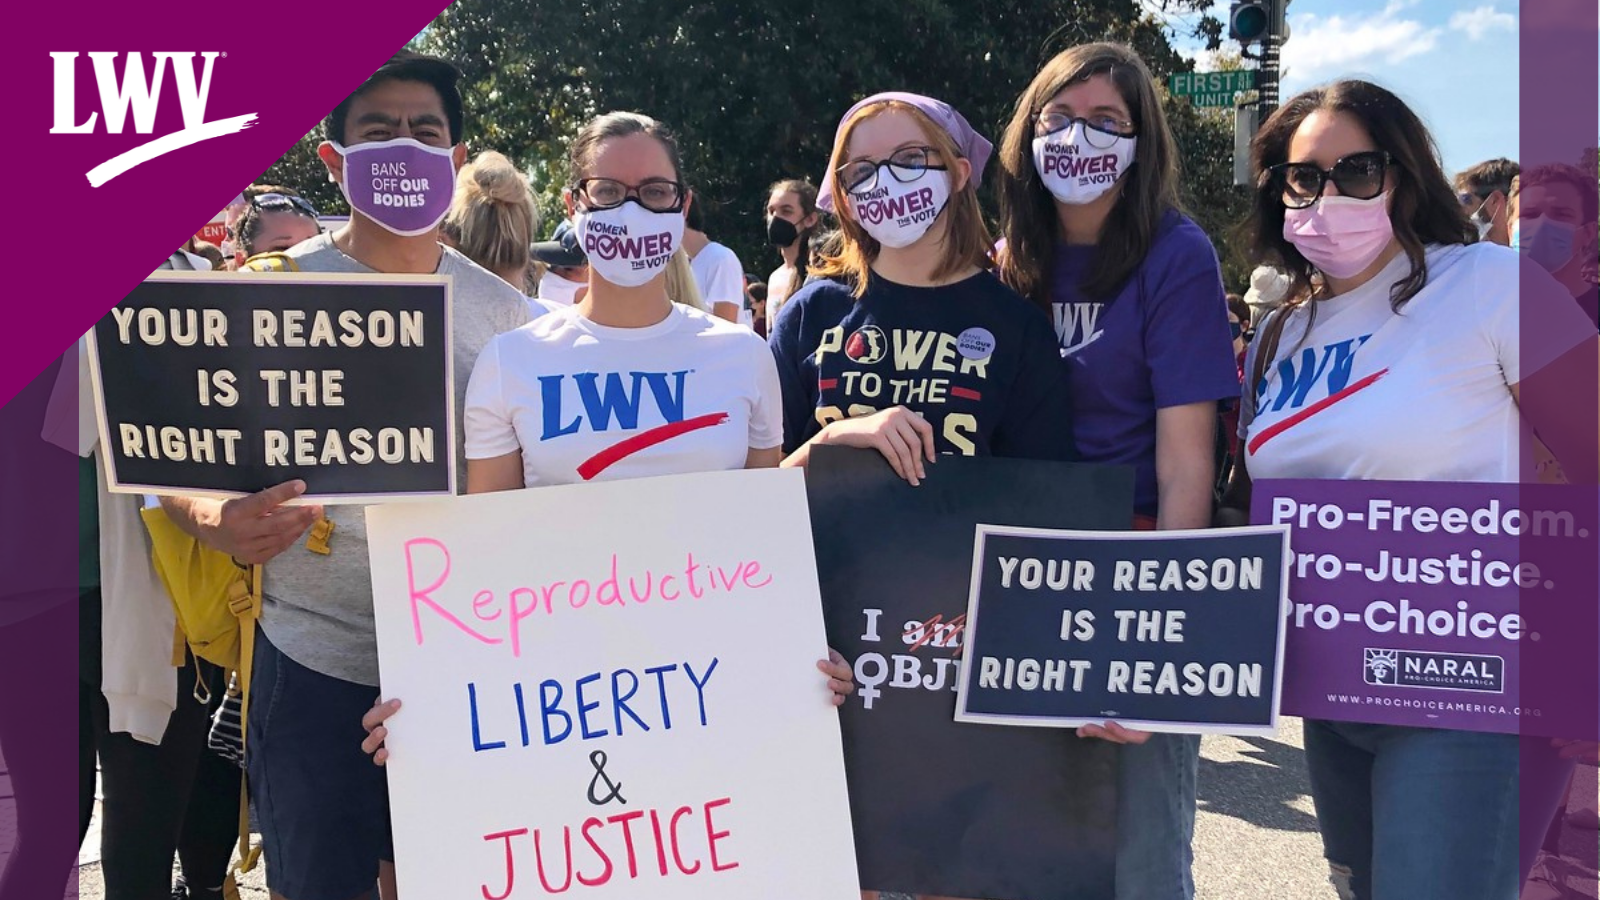 LWV members protesting for reproductive rights